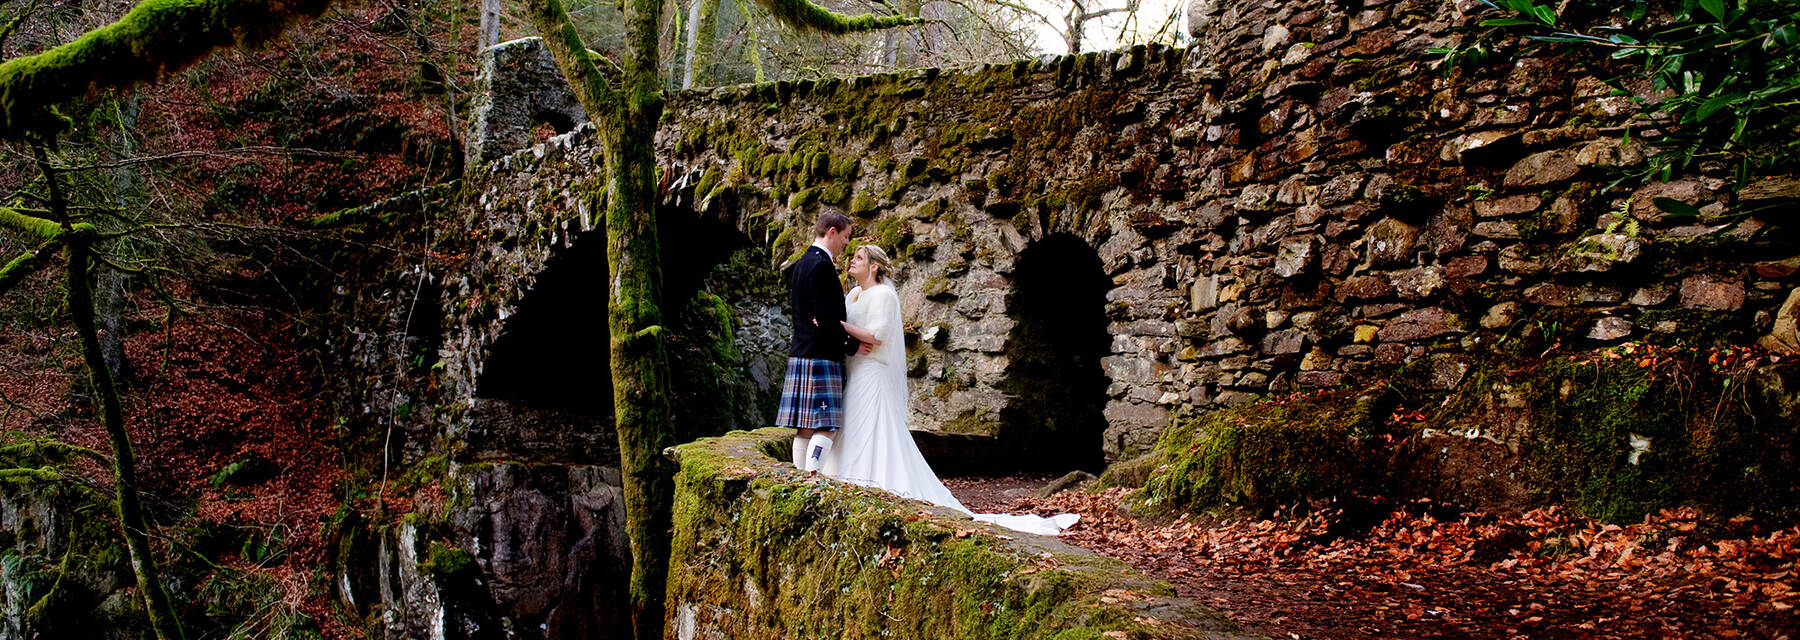 Wedding couple standing by the stone bridge at the Hermitage. Moss-covered branches and old stonework contrast to the rich orange and red autumn leaves on the path and trees.